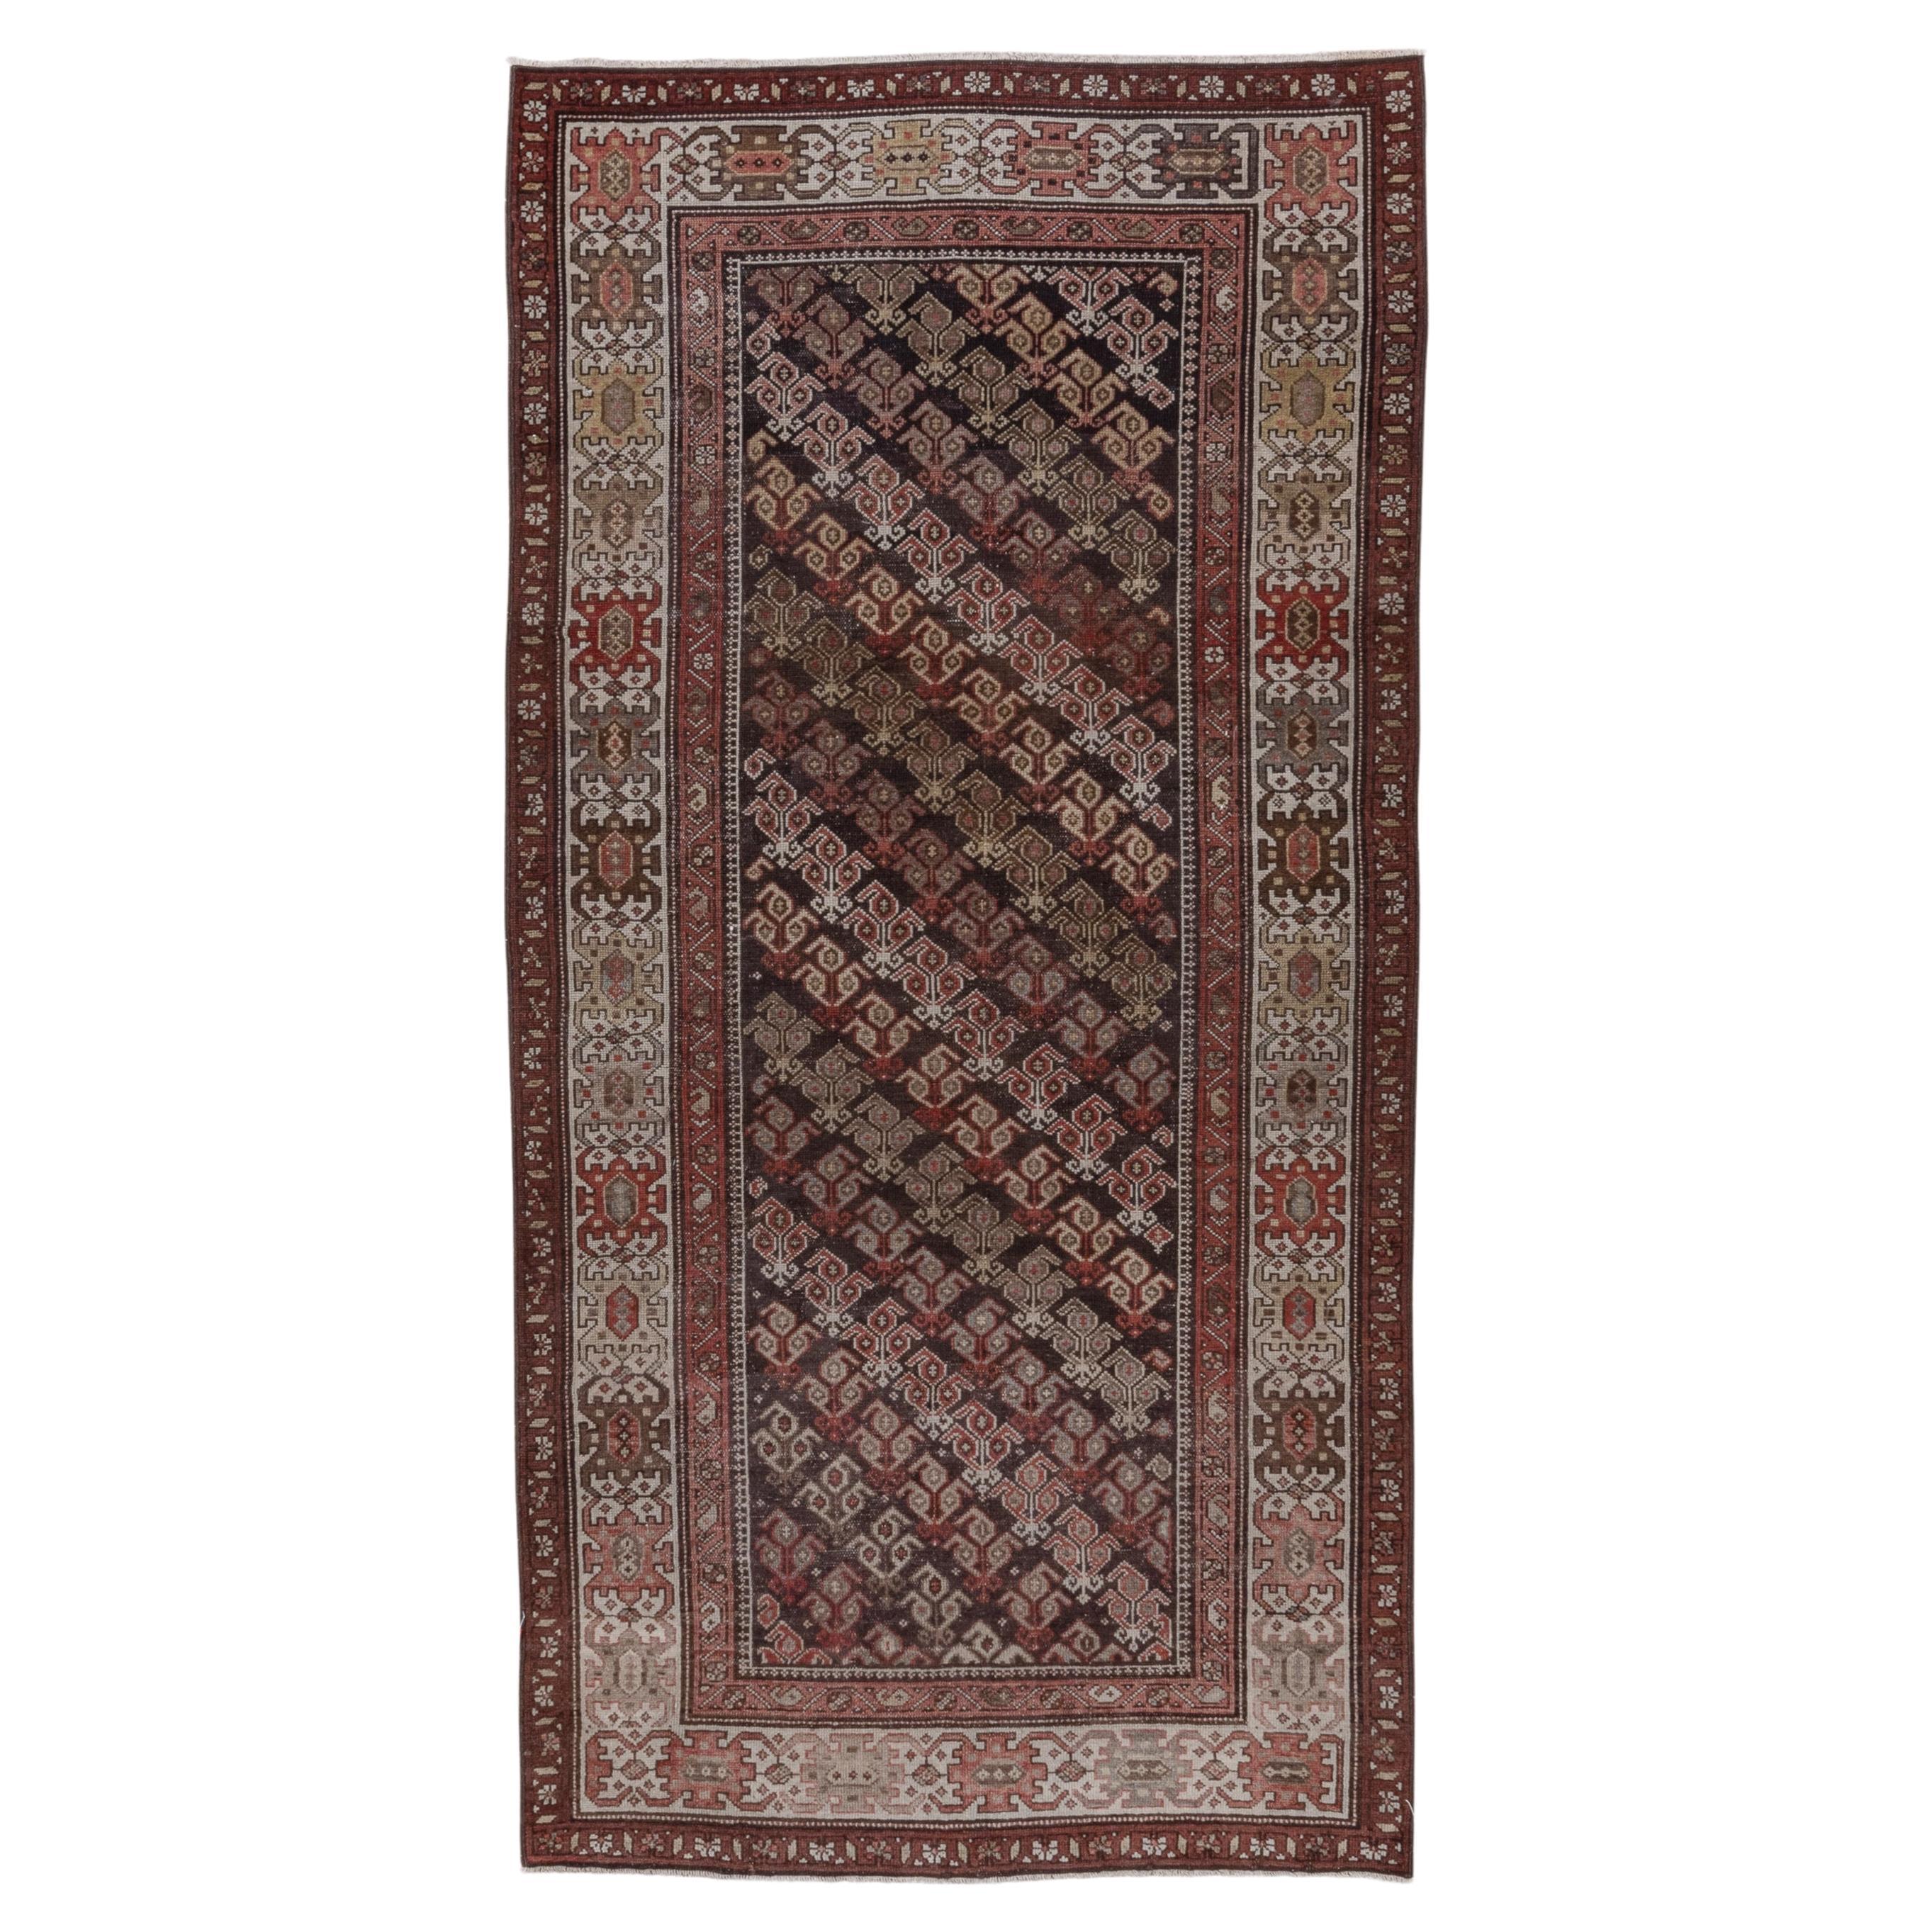 Antique Persian Malayer Area Rug, Dark Brown Allover Field, Red & Gold Accents For Sale